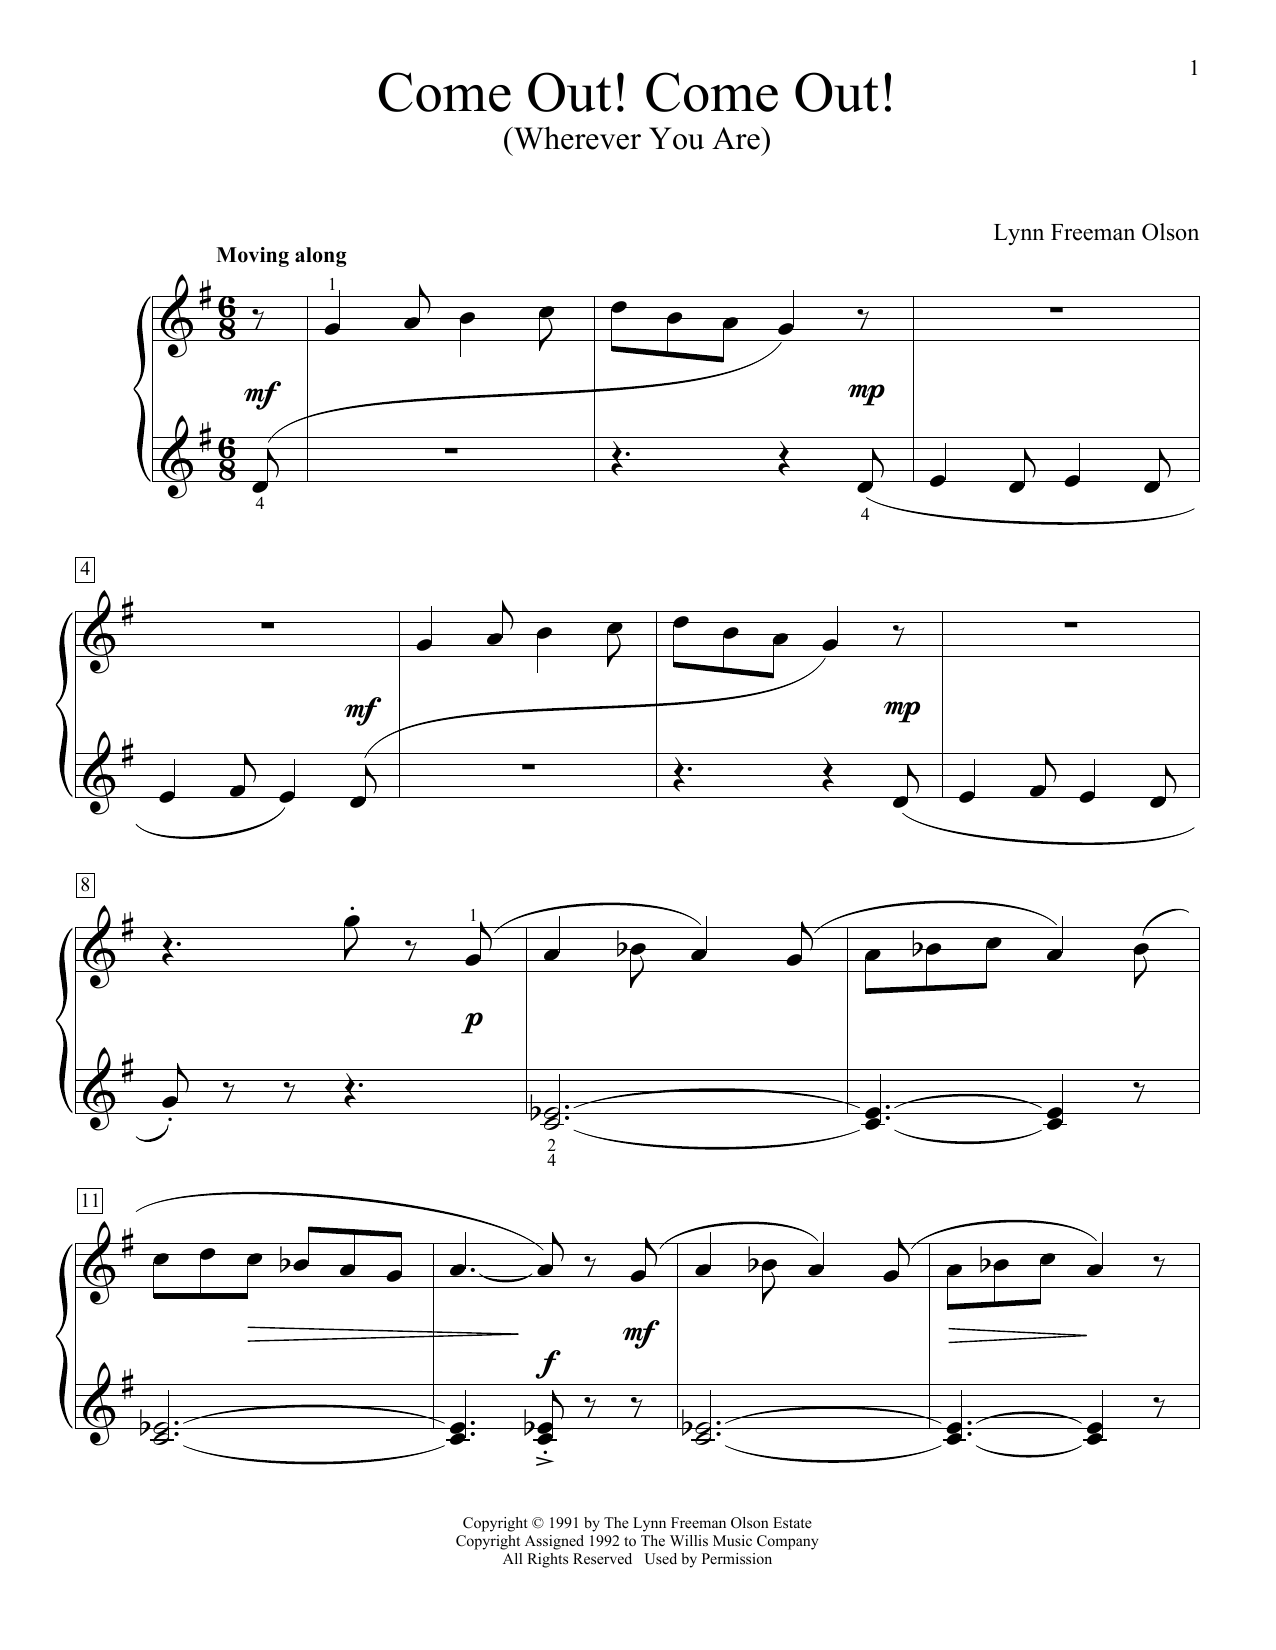 Lynn Freeman Olson Come Out! Come Out! (Wherever You Are) sheet music preview music notes and score for Educational Piano including 2 page(s)